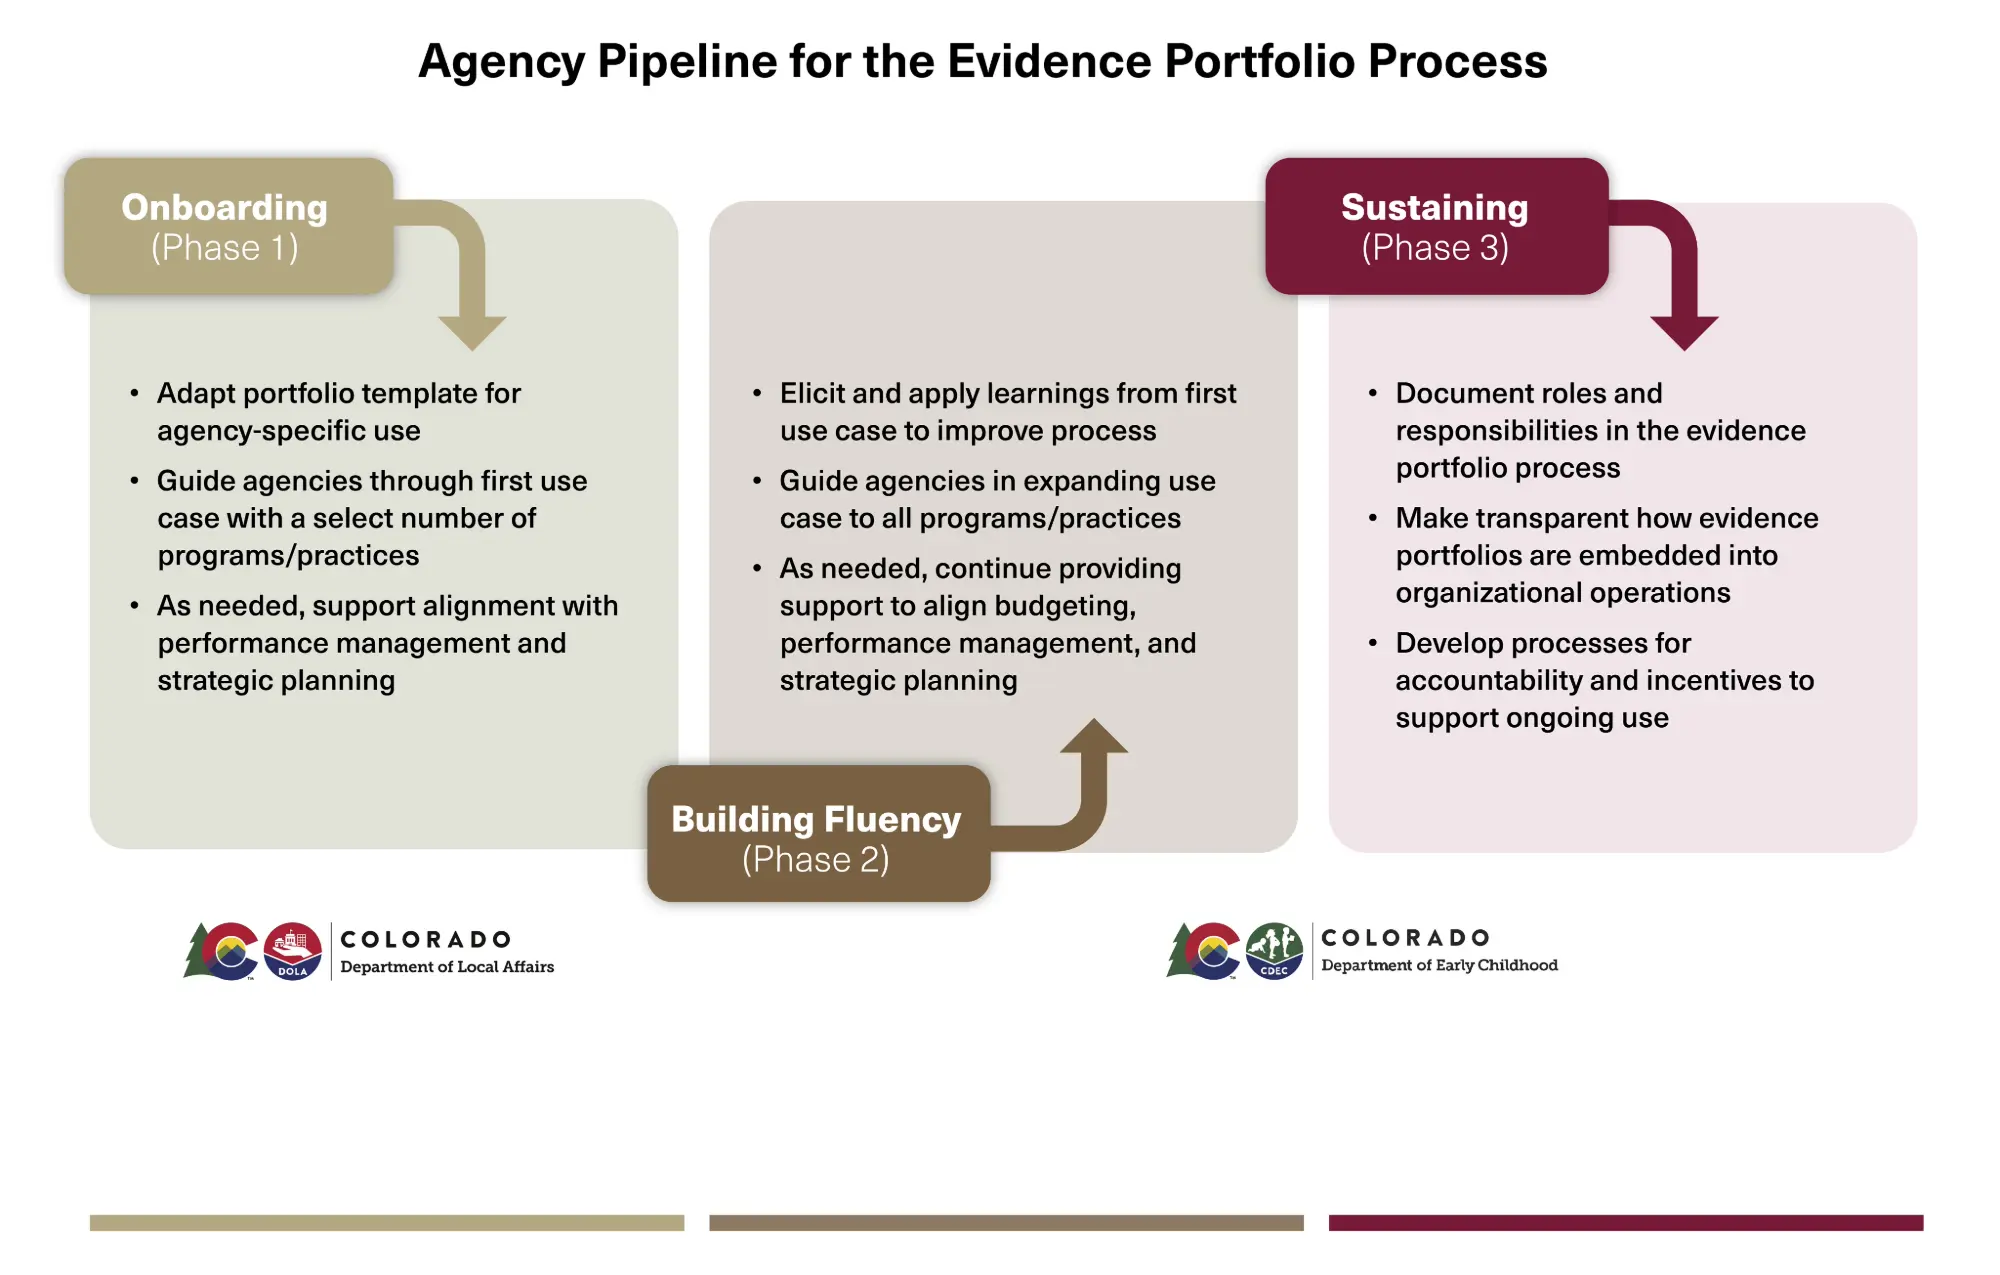 Agency Pipeline for the Evidence Portfolio Process shows the stages from onboarding to building fluency to sustaining